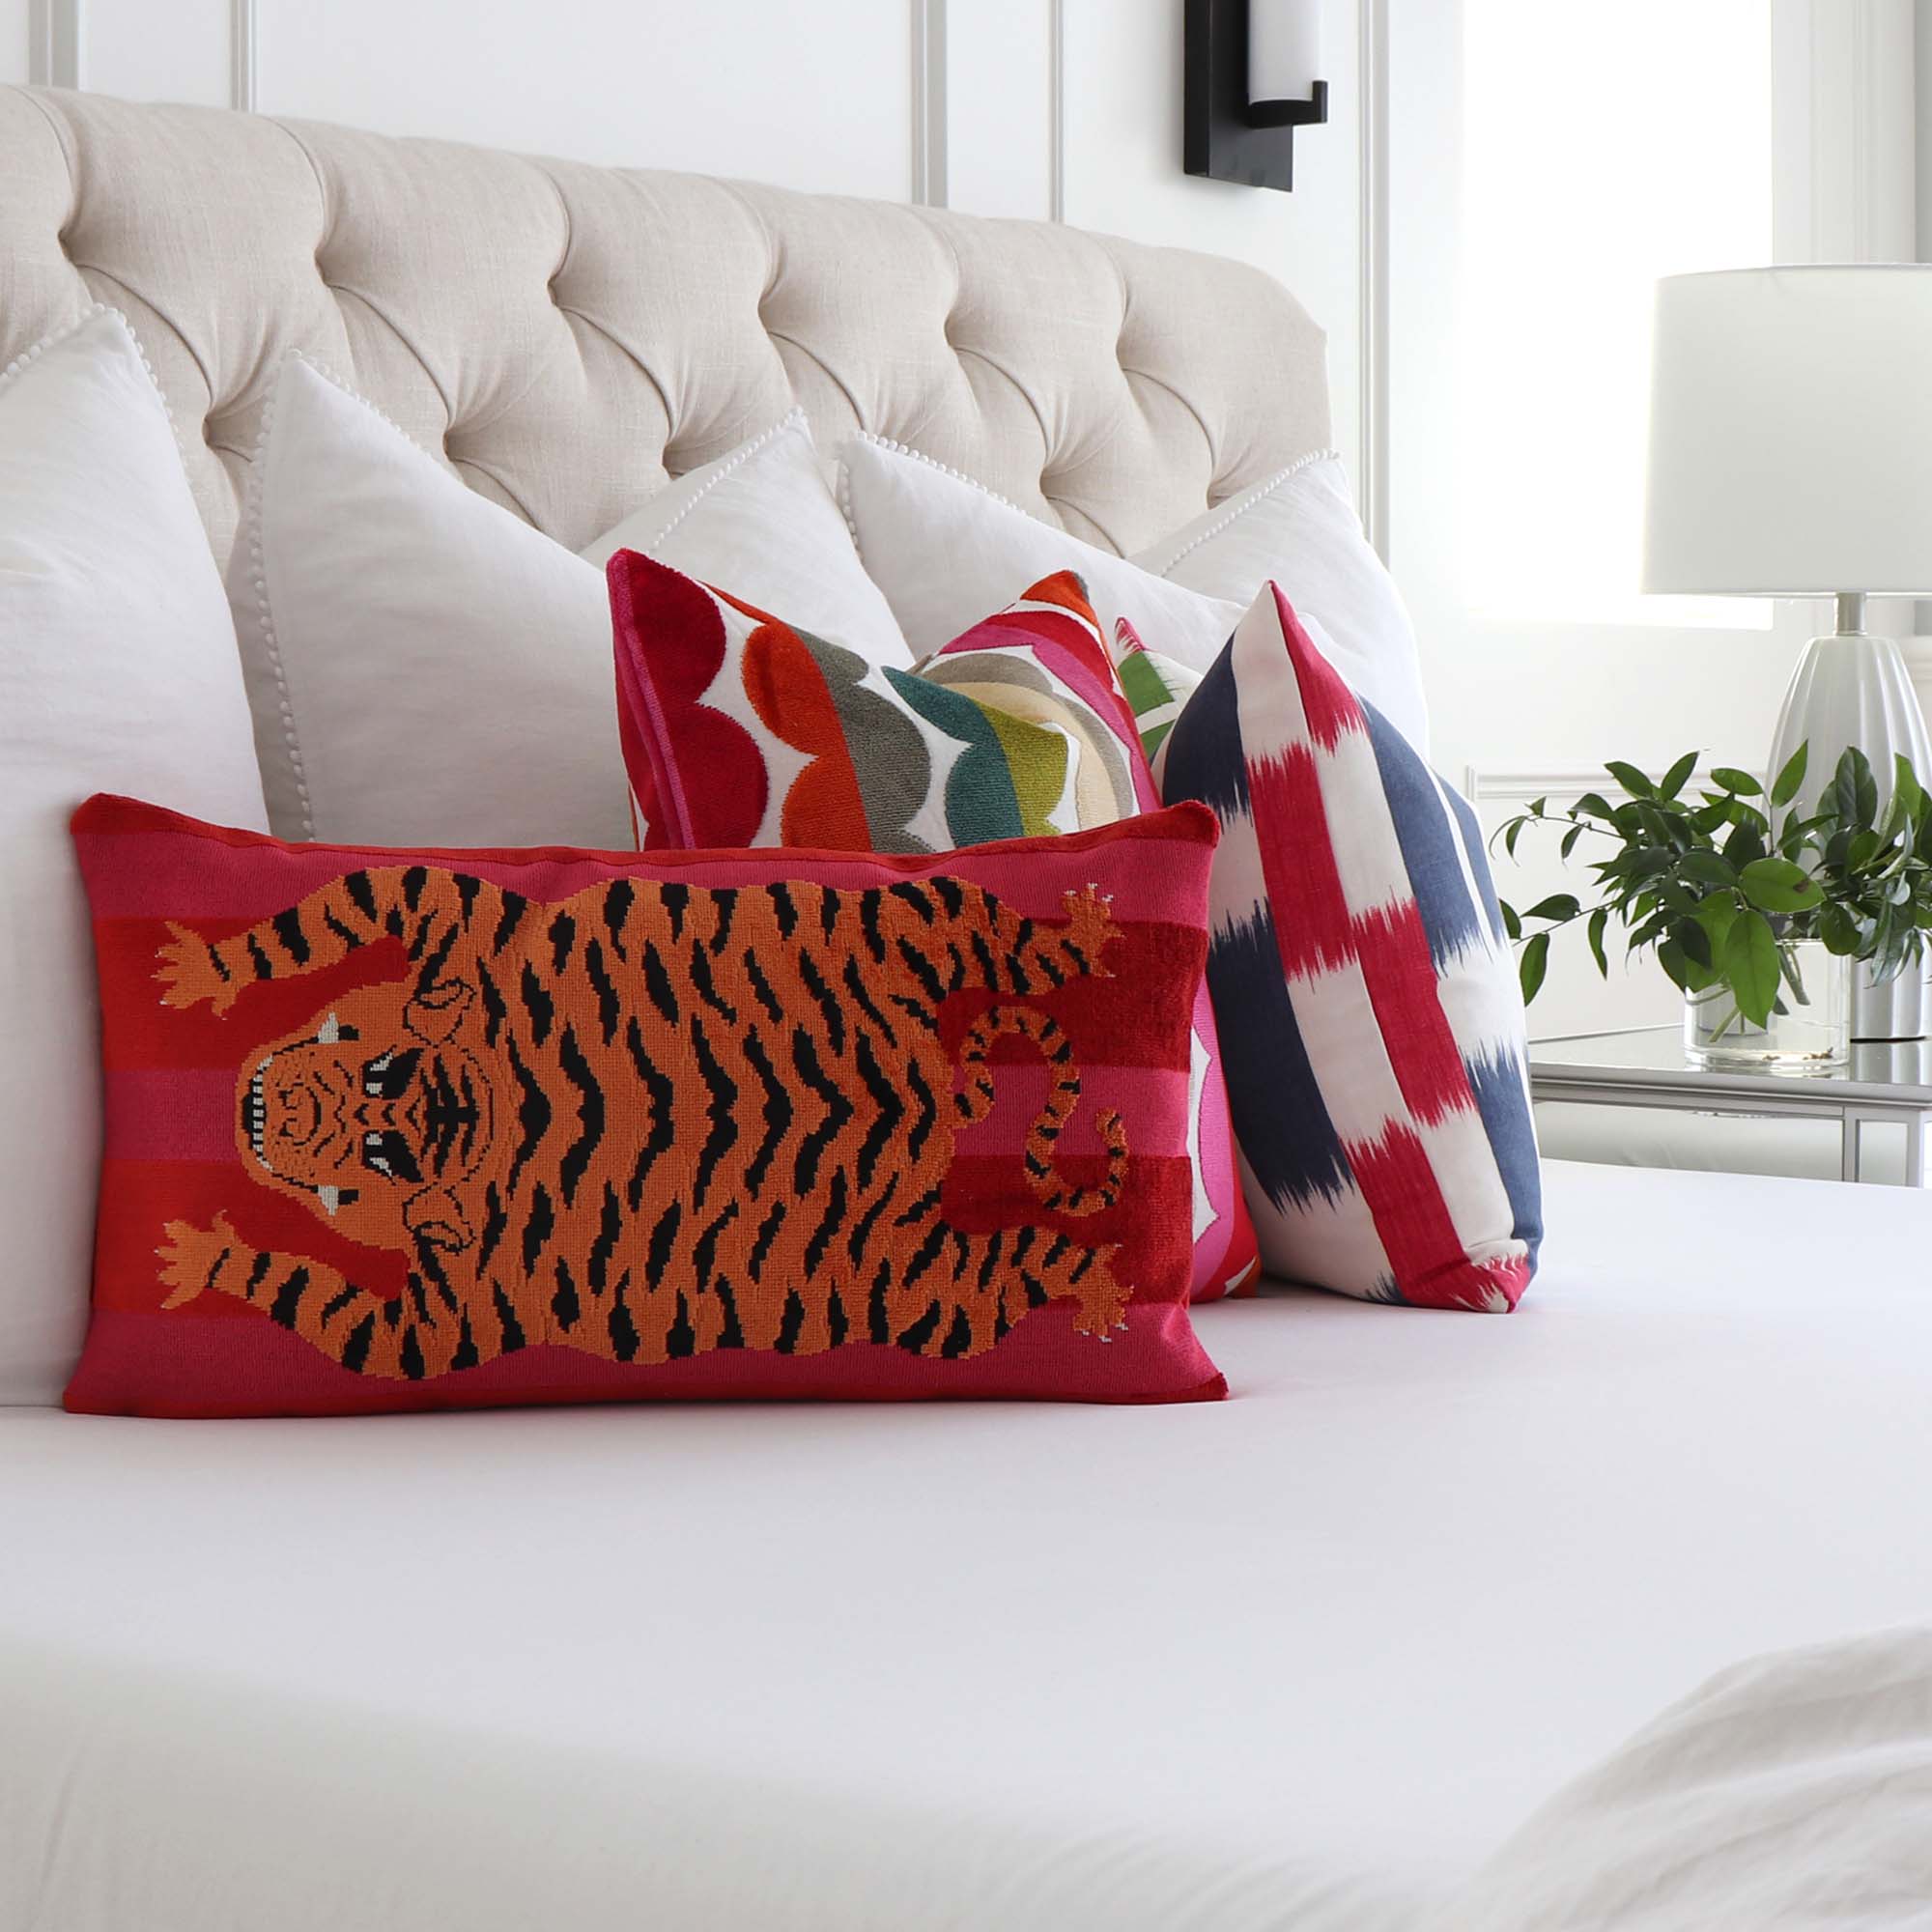 Schumacher Jokhang Tiger Velvet Red and Pink Luxury Designer Throw Pillows on King Bed